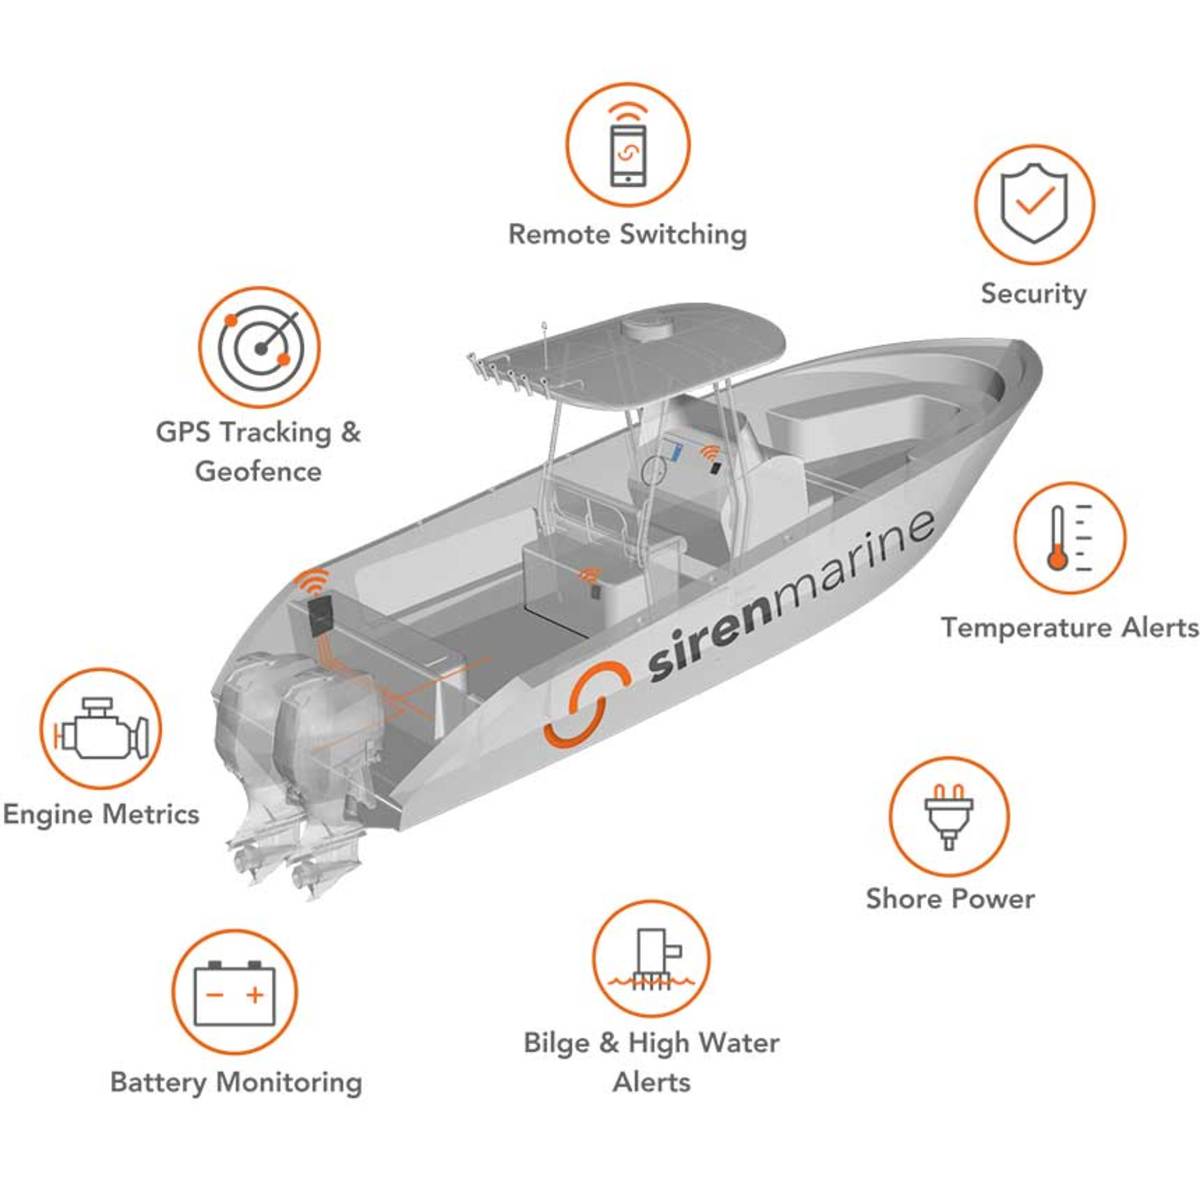 Siren Marine’s ‘smart’ boat system raises the bar in vessel monitoring by now giving the user an ability to act remotely on technical issues as they arise.